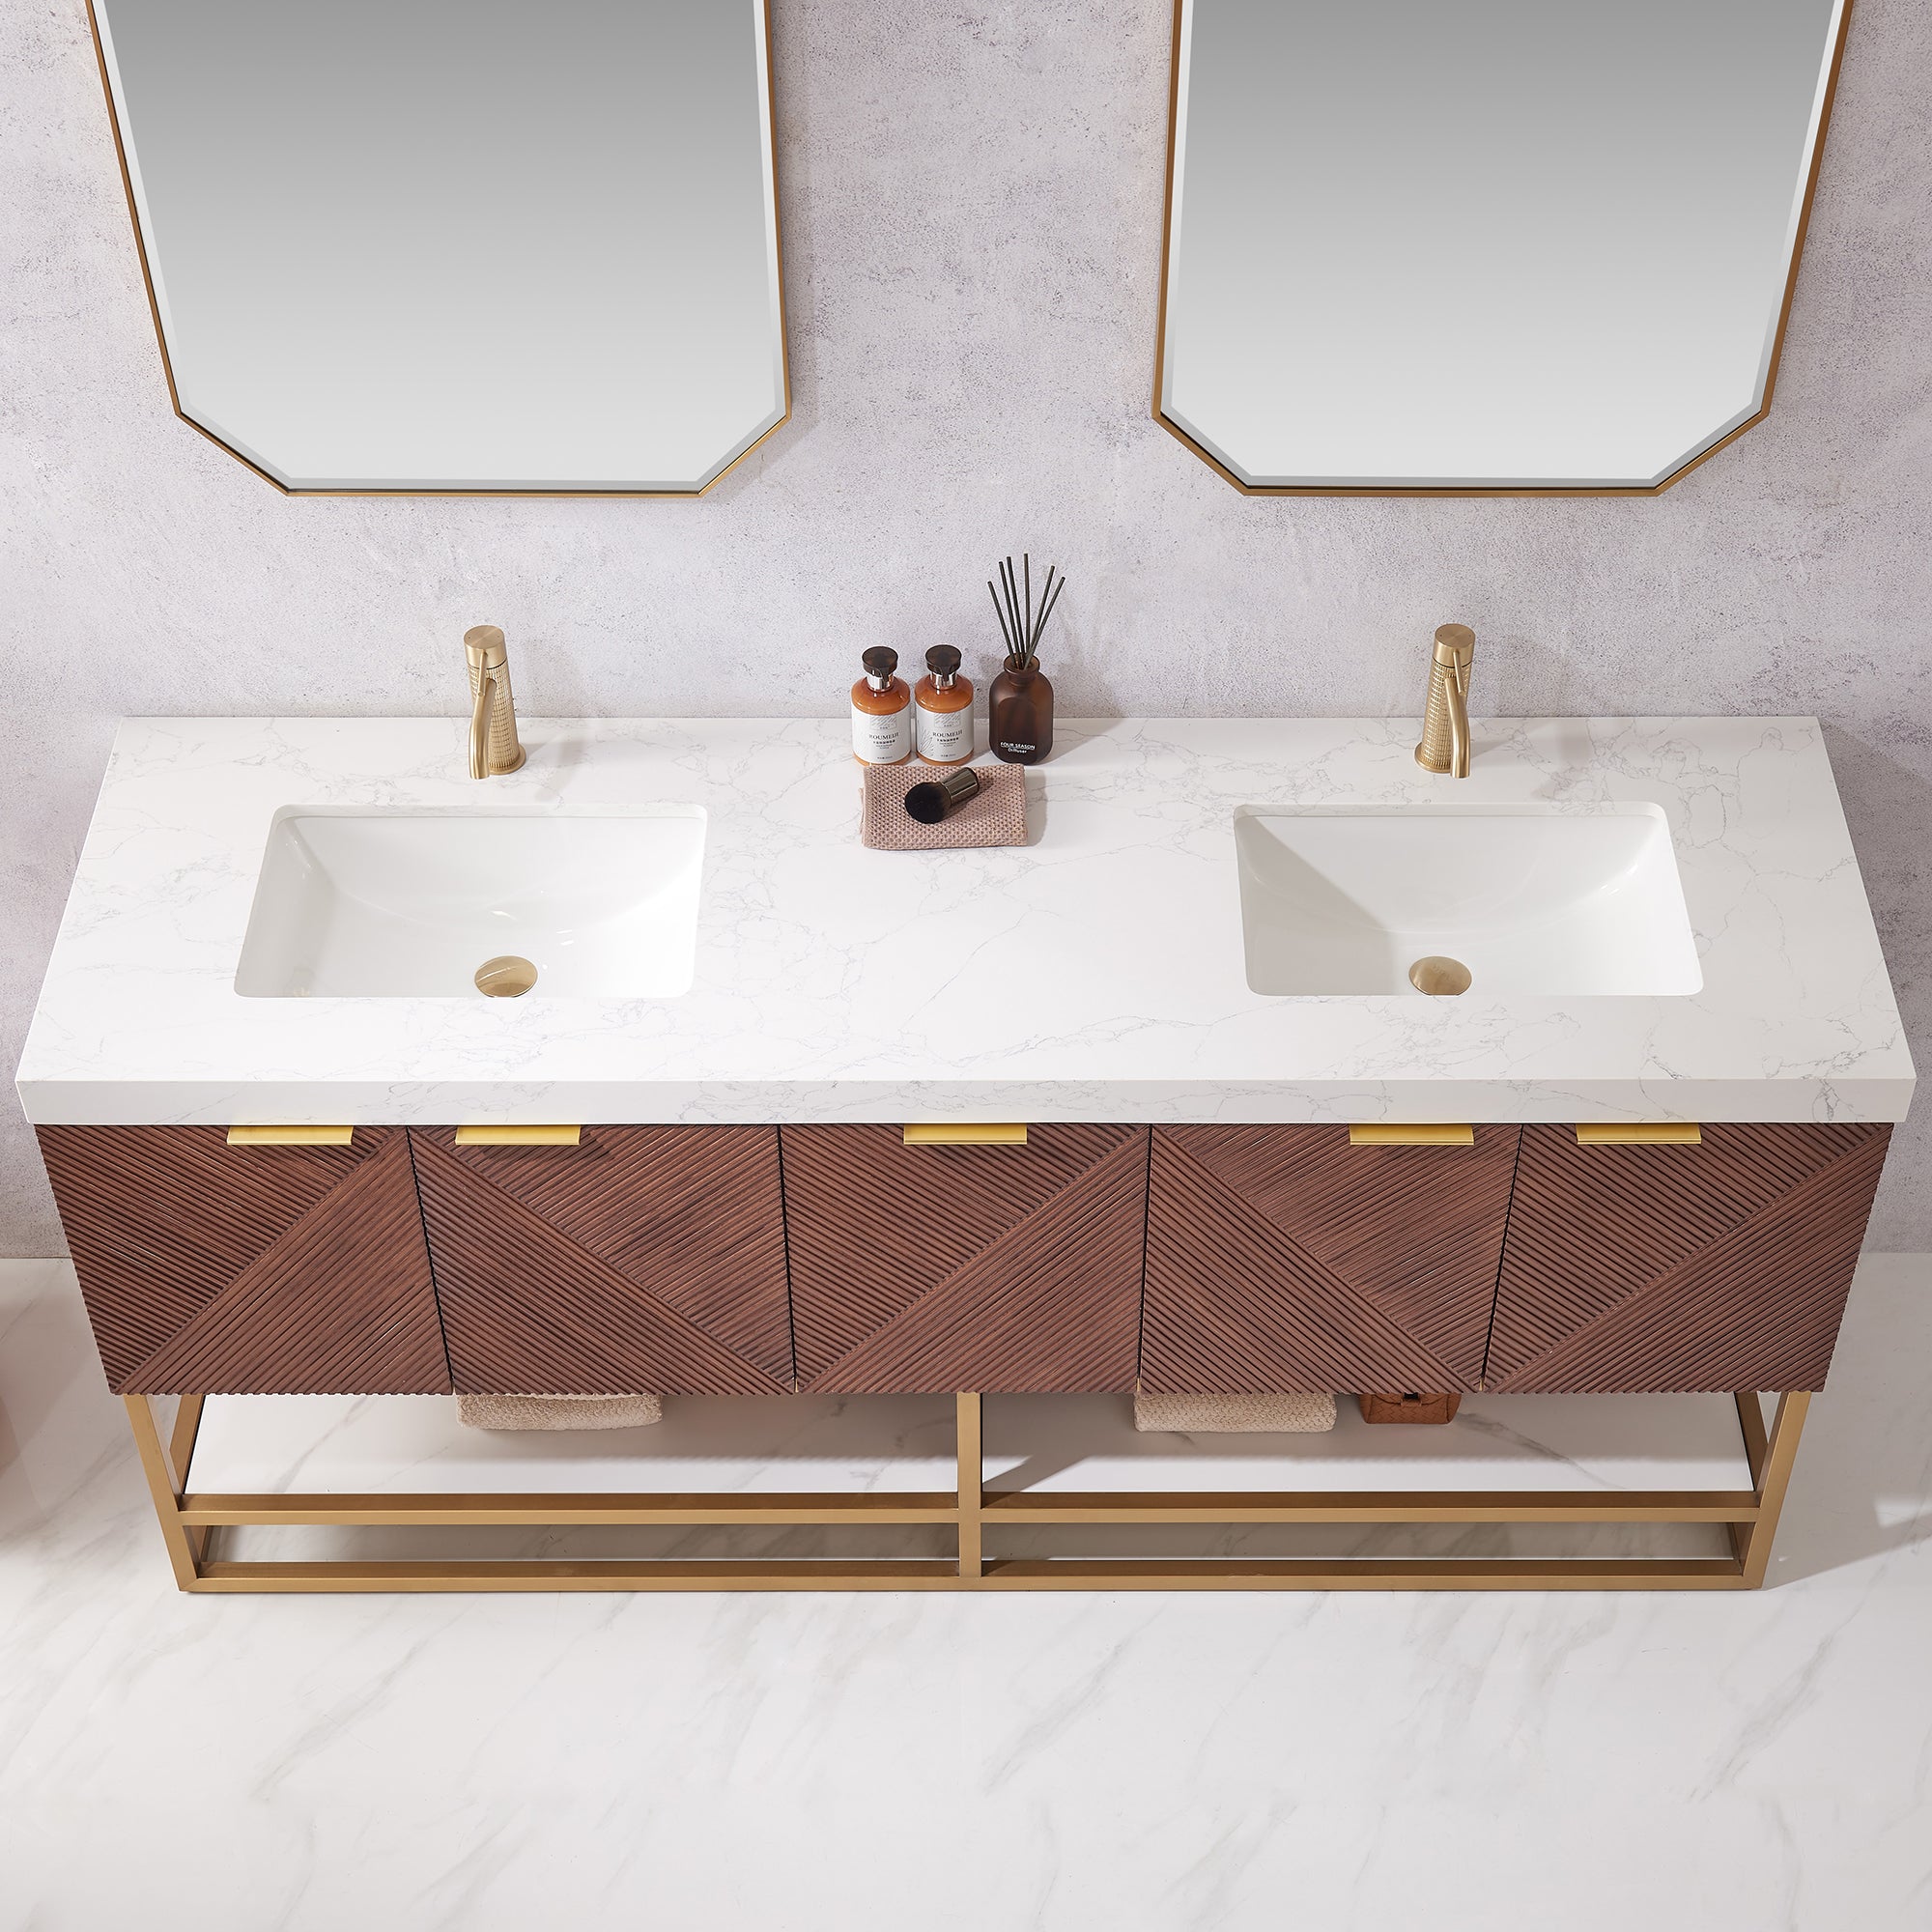 Mahon 72G" Free-standing Double Bath Vanity in North American Deep Walnut with White Grain Composite Stone Top